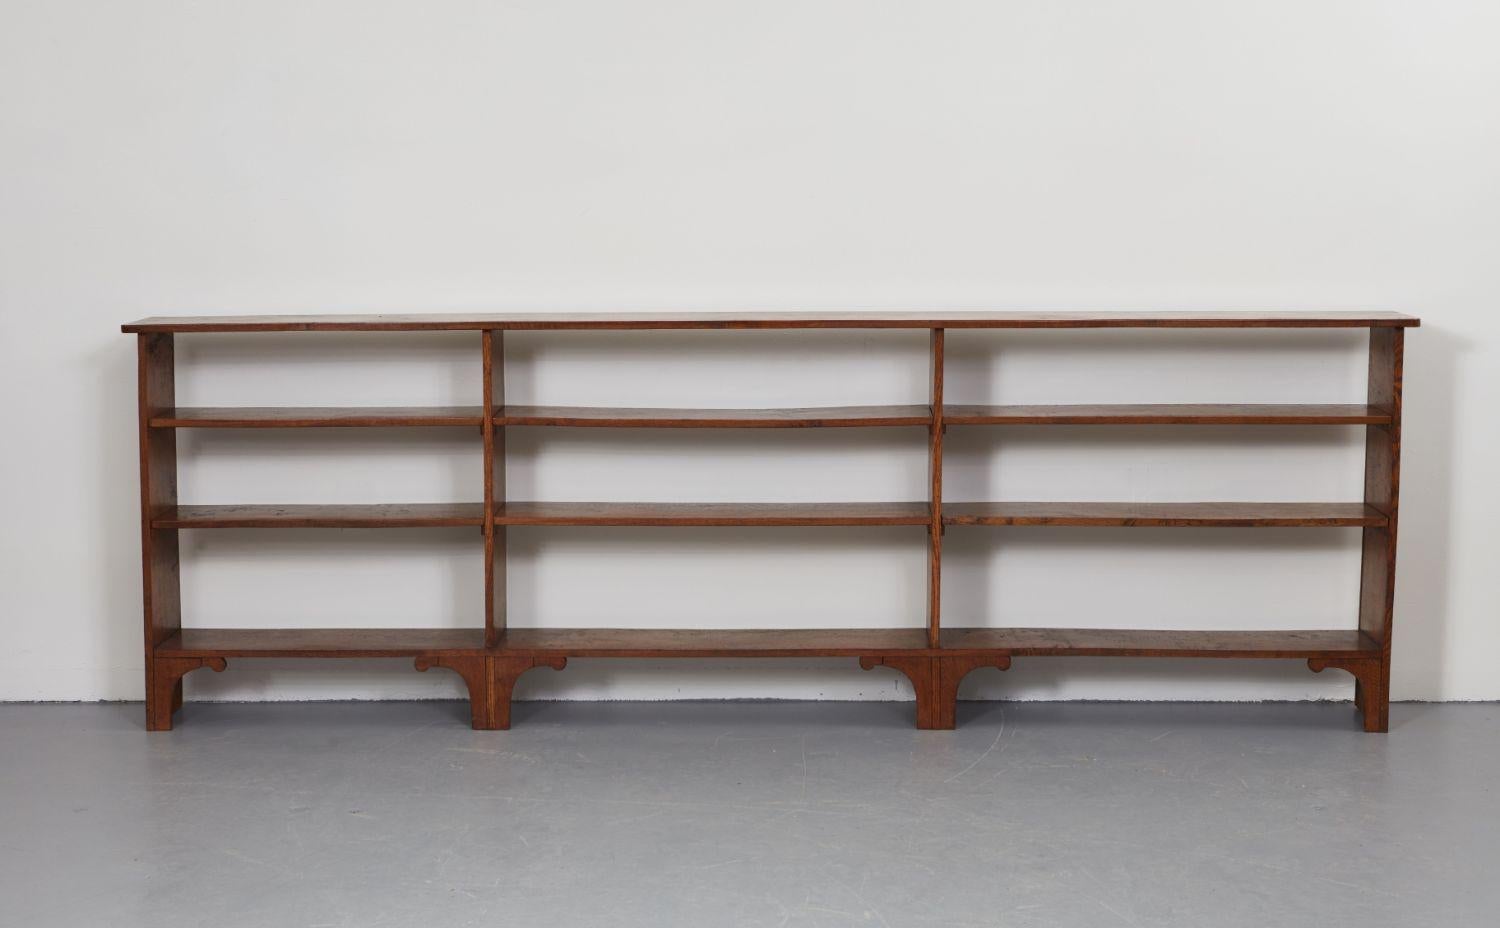 A long open bookcase or storage unit with nine open bays and a top surface shelf. Supported on raised feet with shaped corner brackets. In solid oak with good graining and color. Useful narrow proportions for use under a window or as shoe and bag